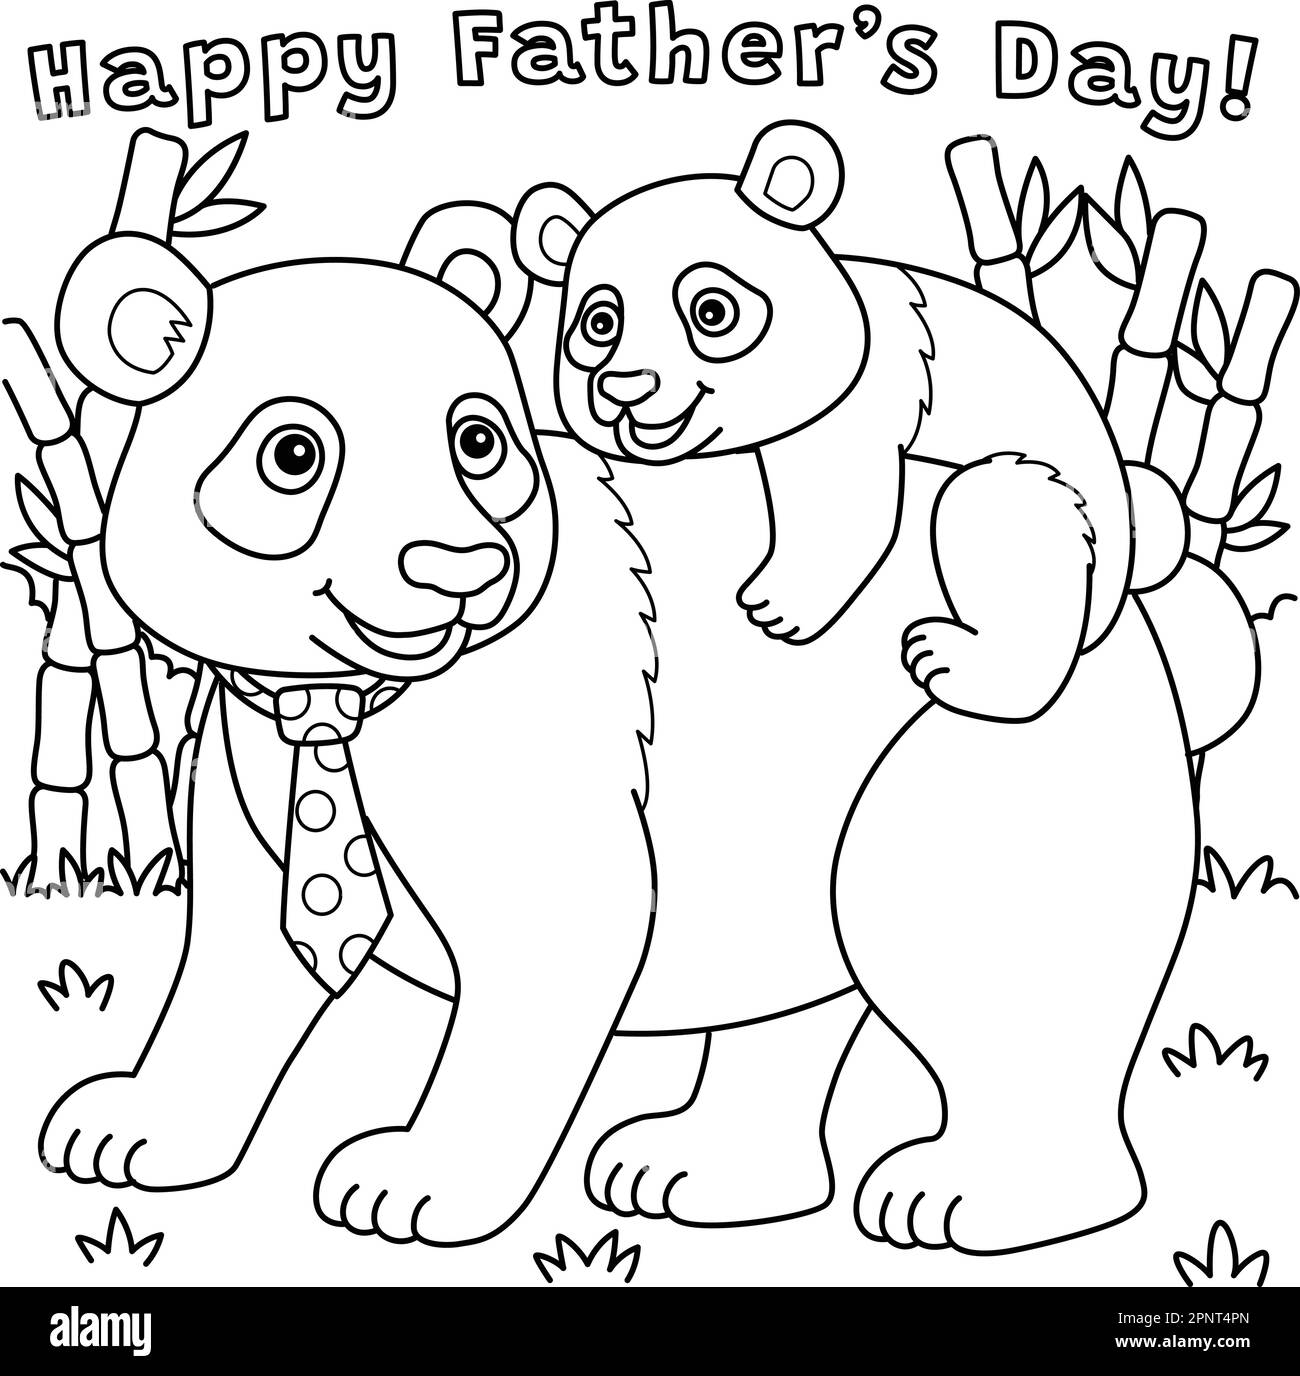 Happy Fathers Day Panda Coloring Page for Kids Stock Vector